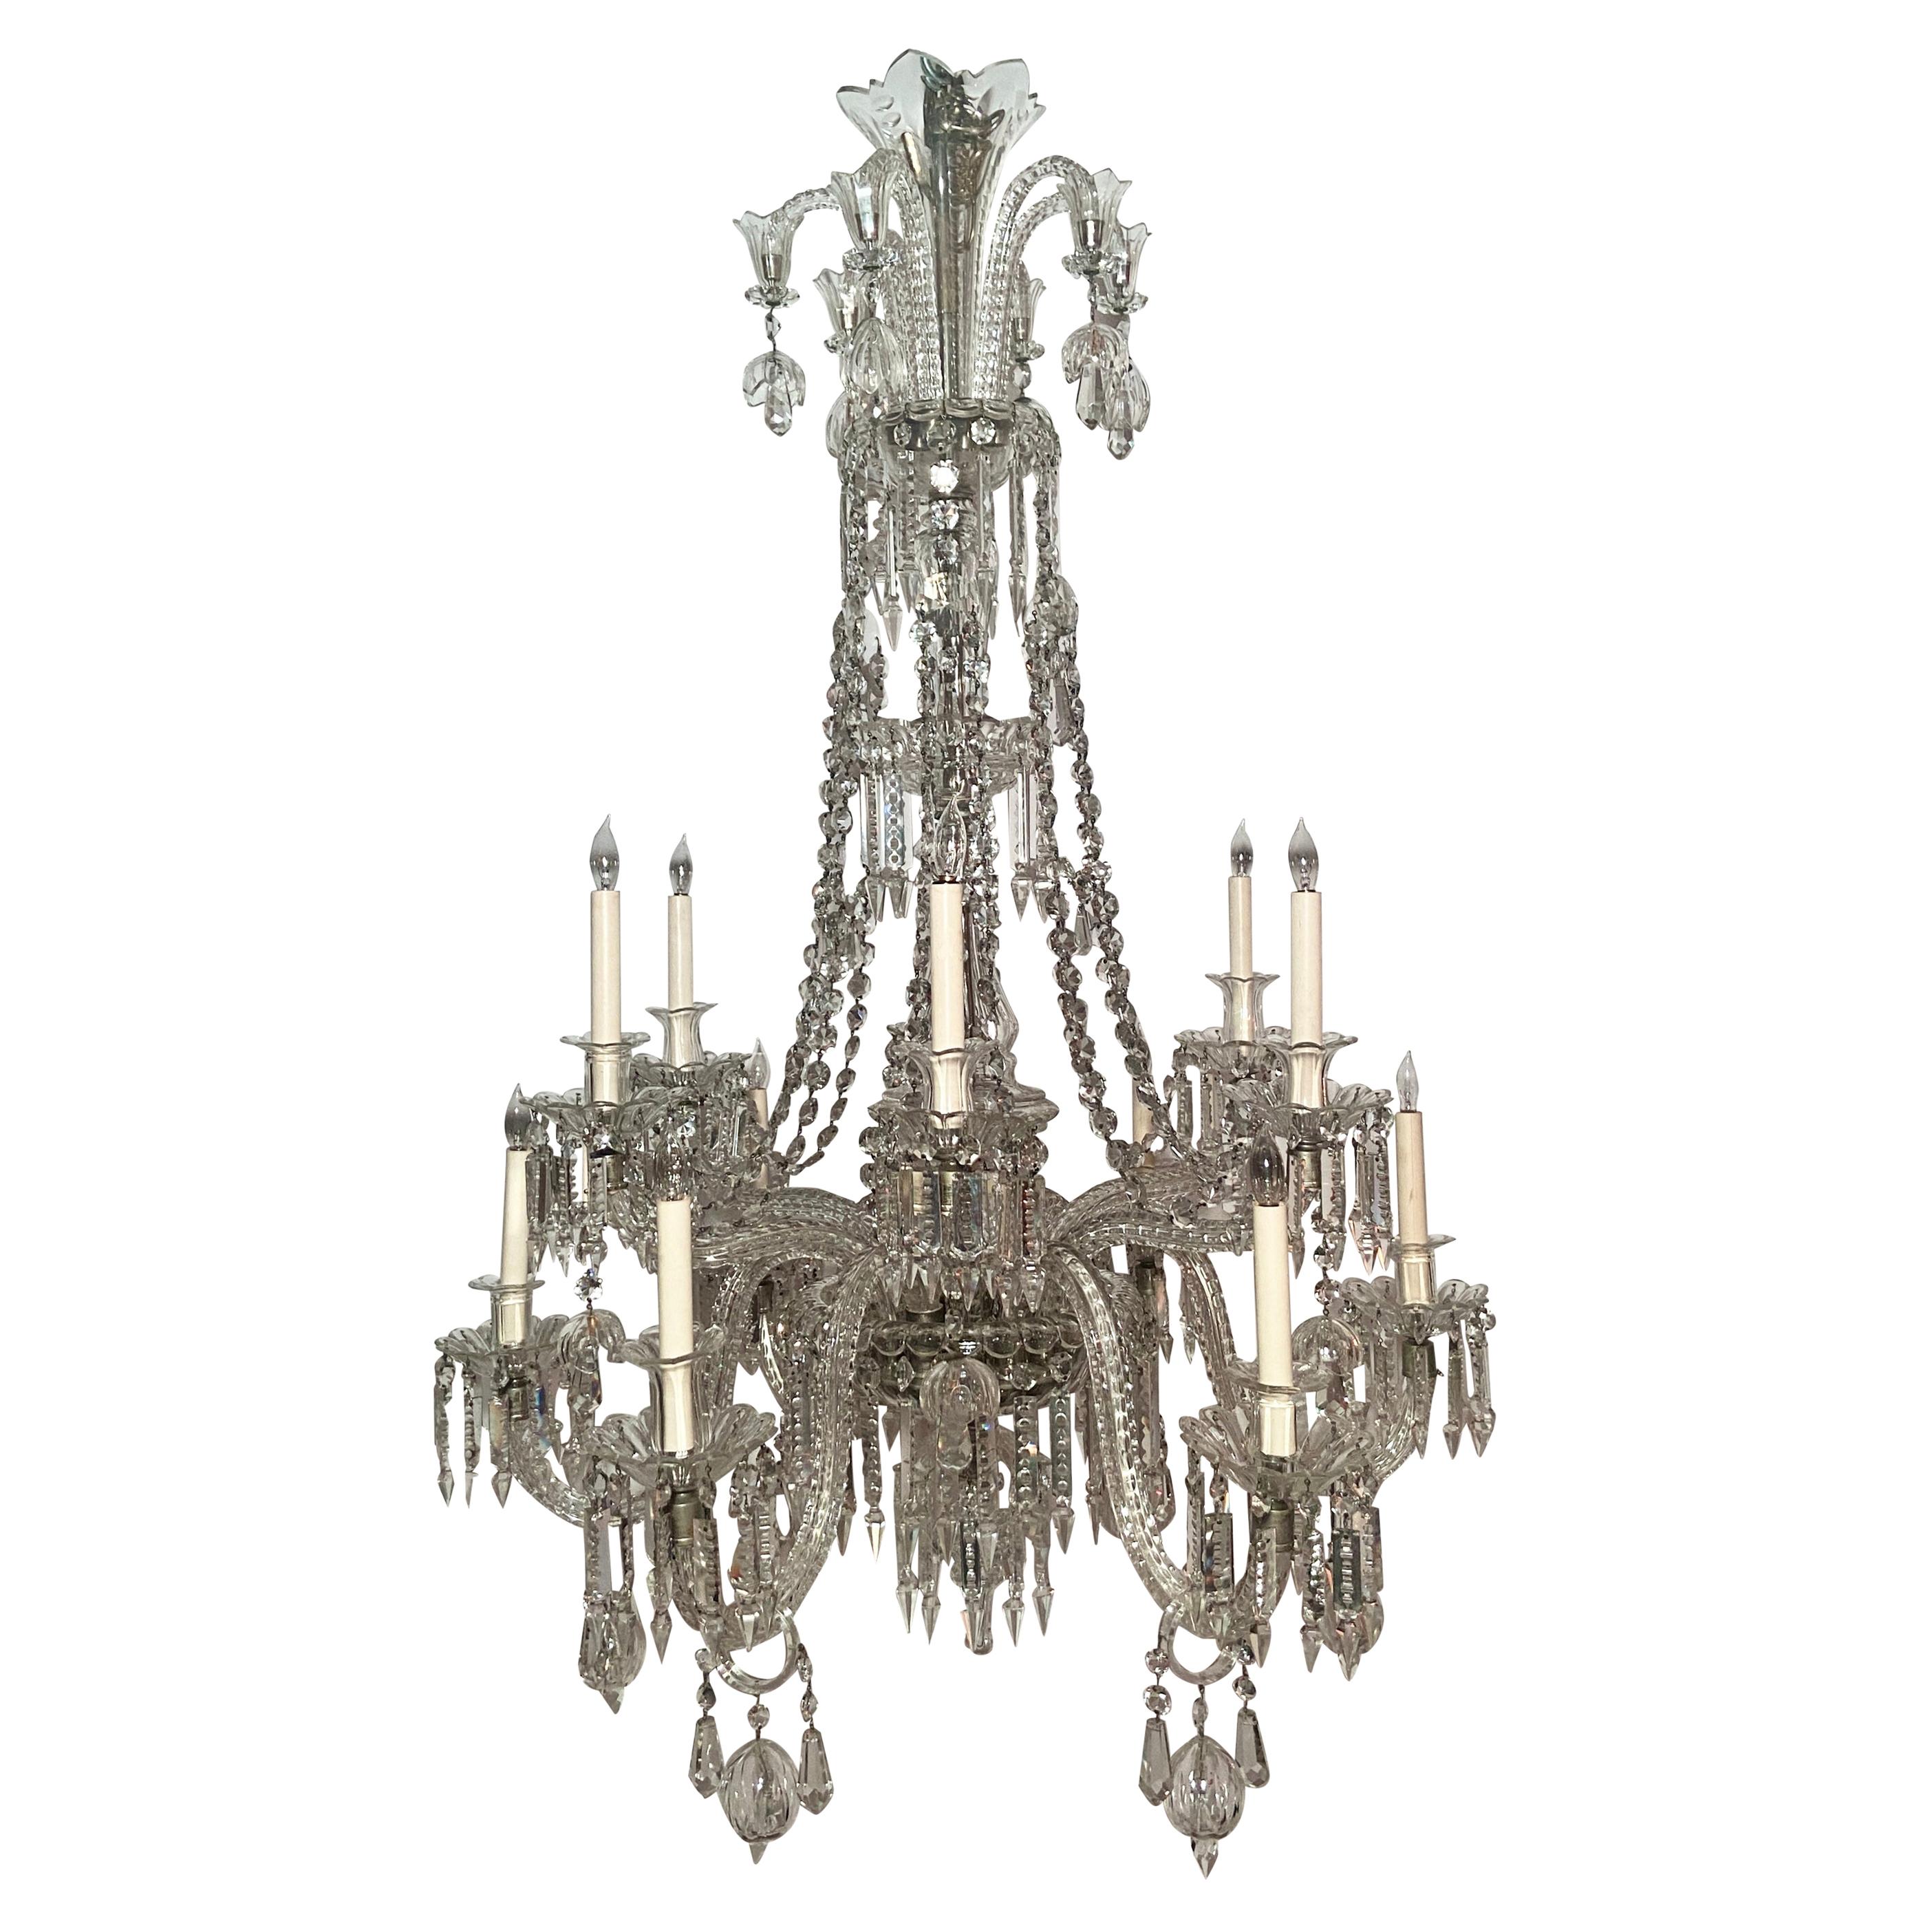 How can I tell if a crystal chandelier is real?